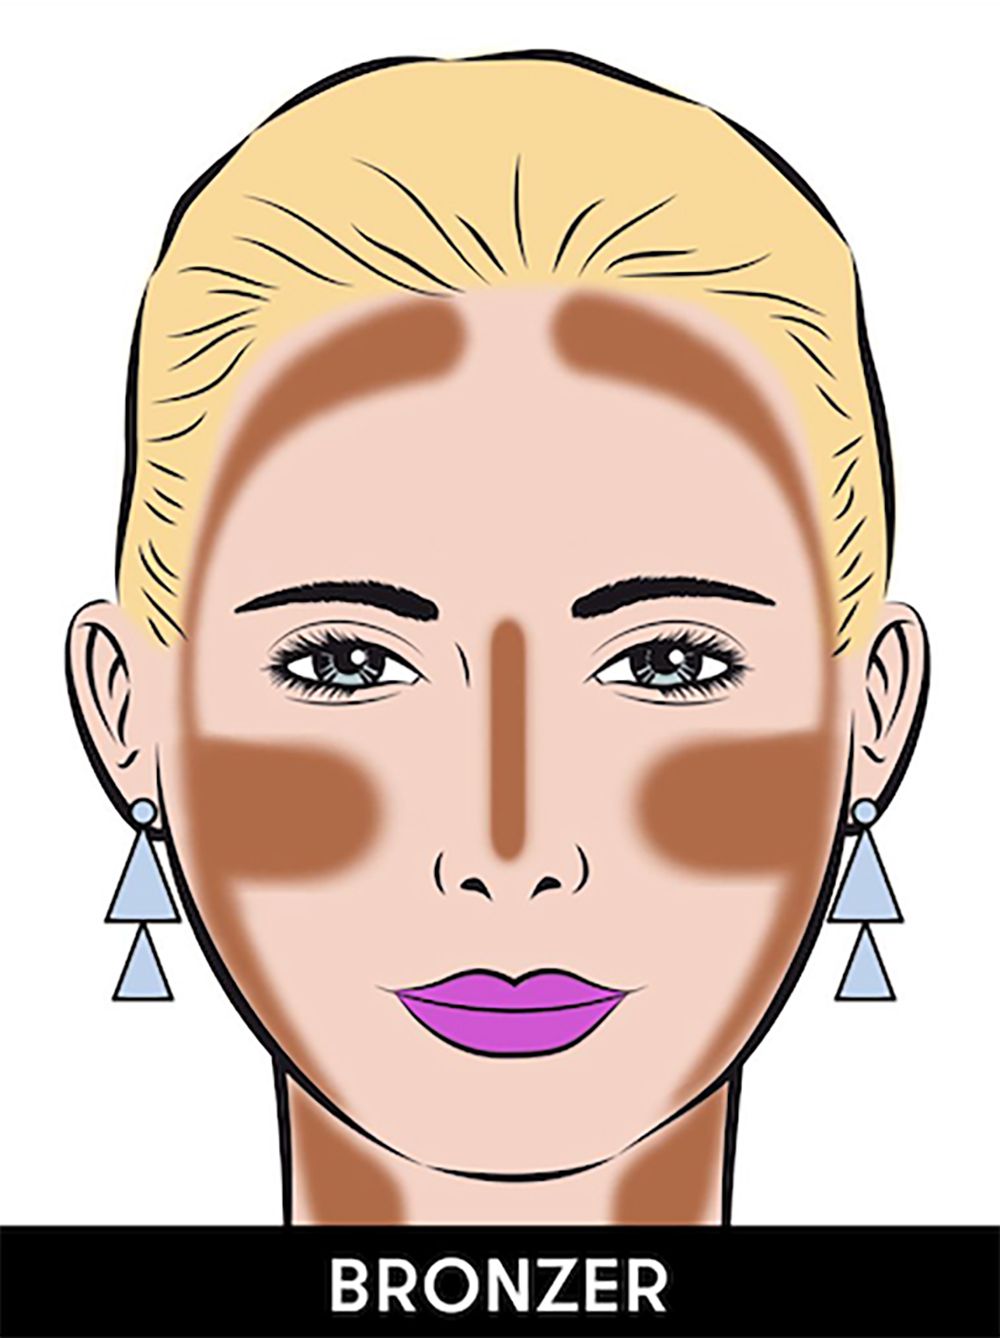 afsked deadlock Senator How to Contour Your Face in 4 Steps - Contour Makeup & Highlight Tips